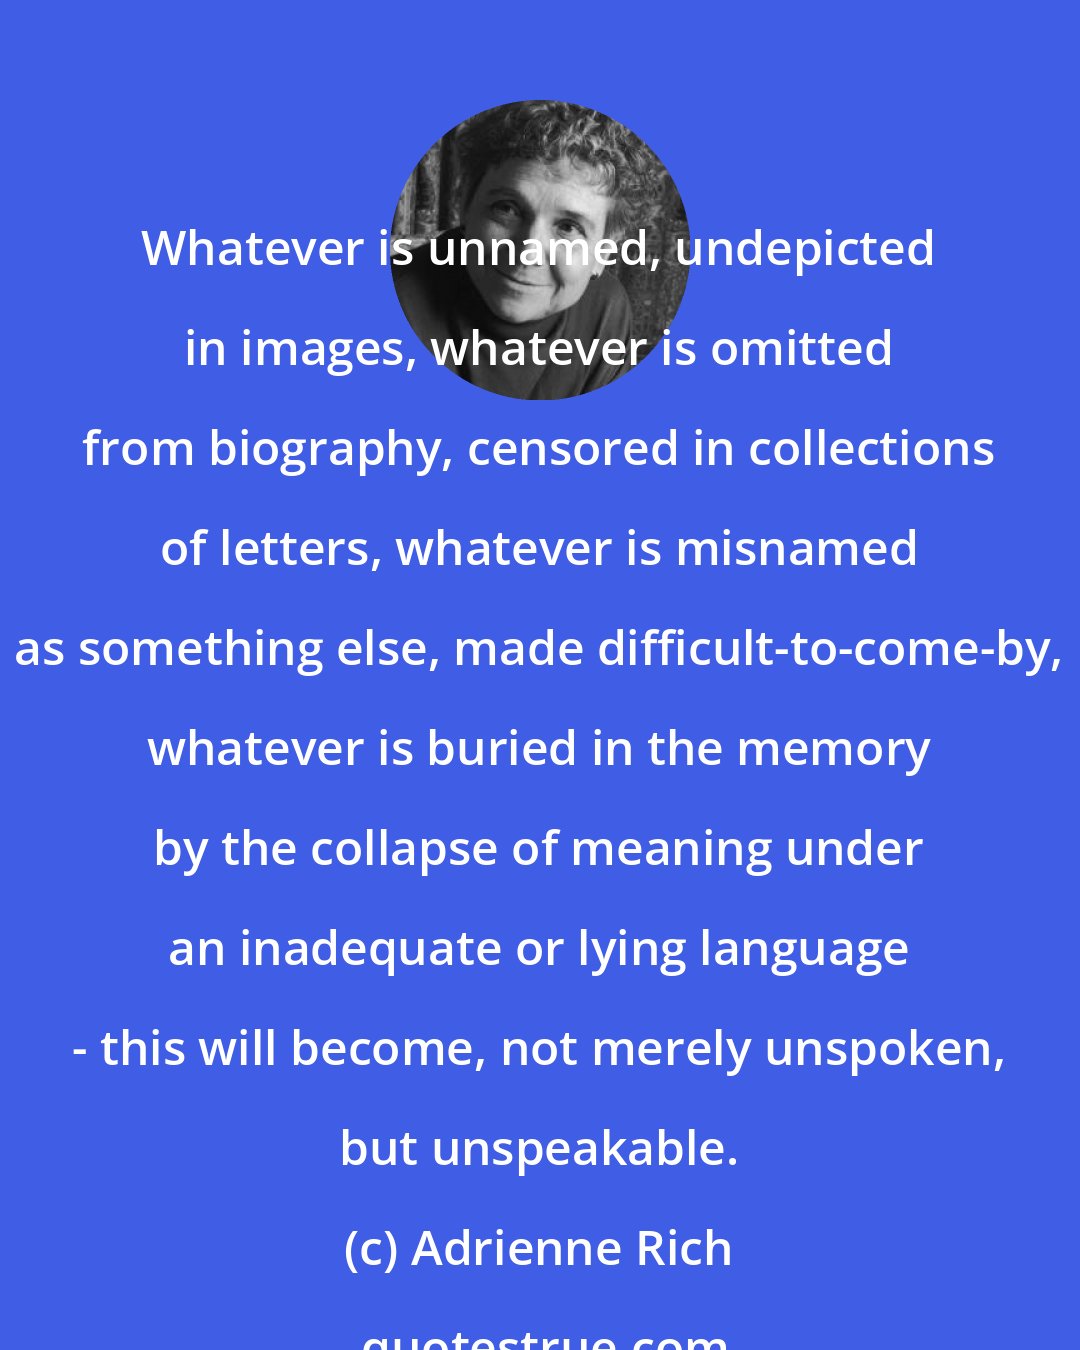 Adrienne Rich: Whatever is unnamed, undepicted in images, whatever is omitted from biography, censored in collections of letters, whatever is misnamed as something else, made difficult-to-come-by, whatever is buried in the memory by the collapse of meaning under an inadequate or lying language - this will become, not merely unspoken, but unspeakable.